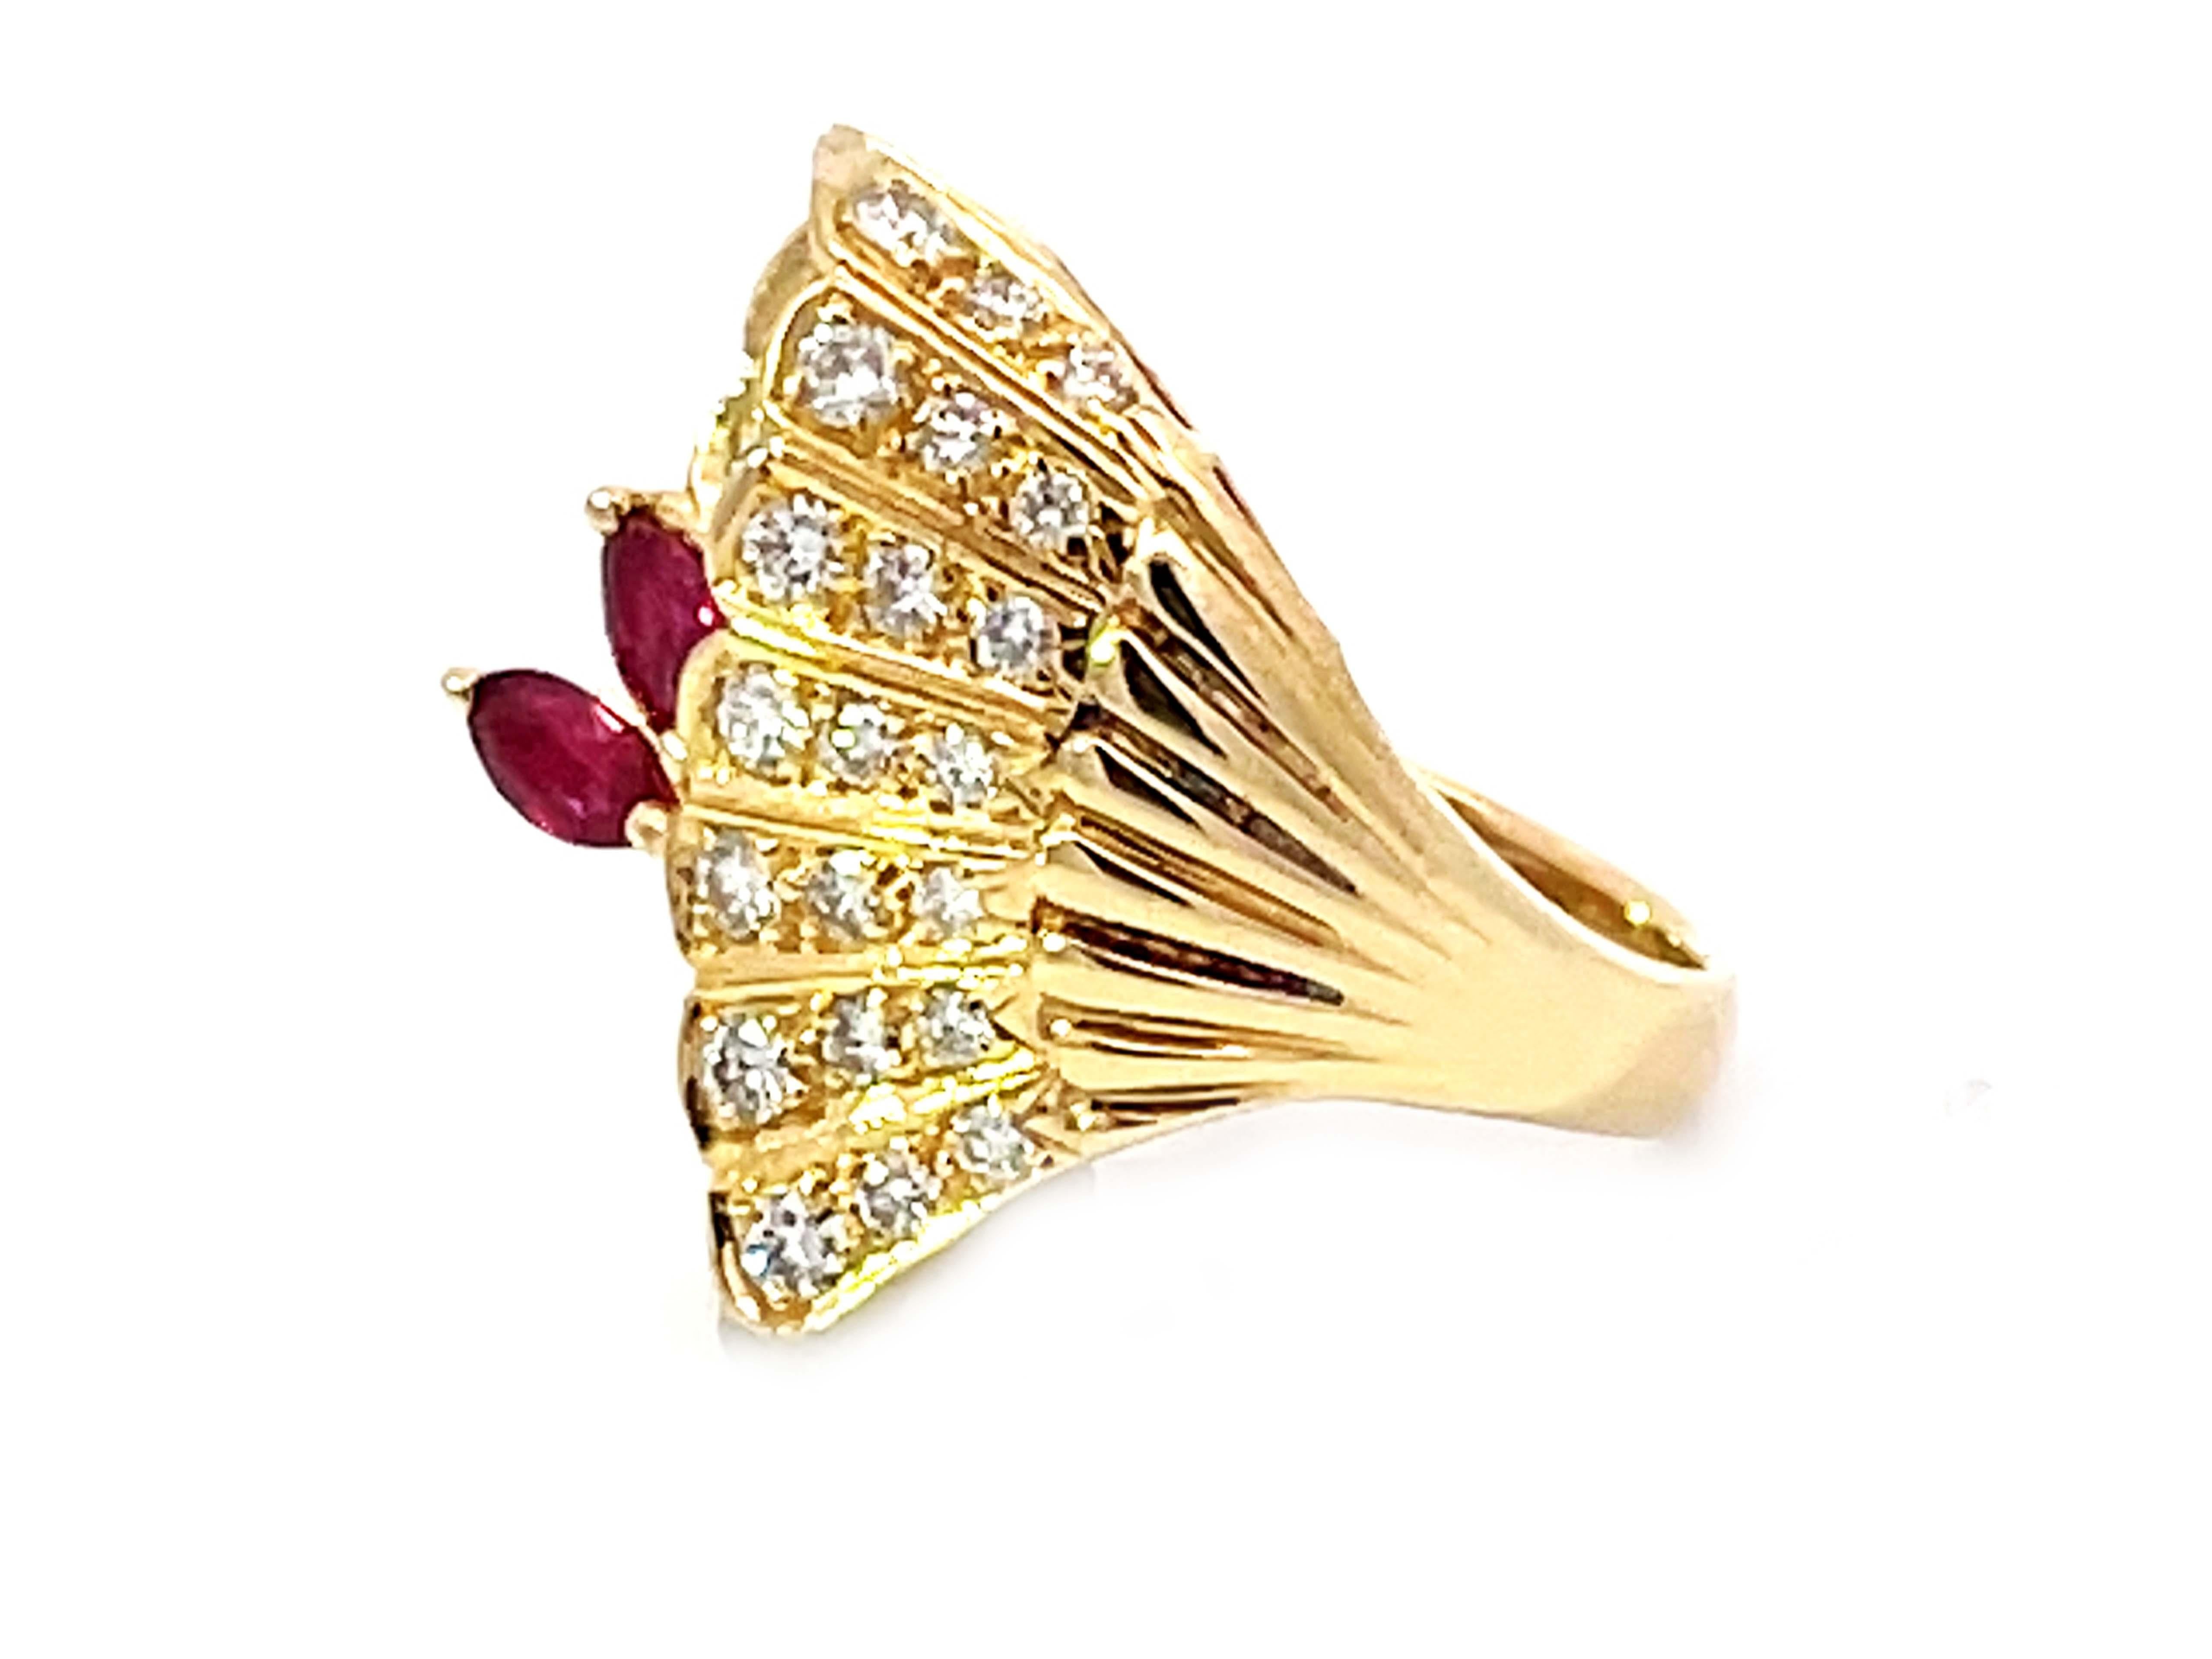 Brilliant Cut Marquise Red Ruby Diamond Cocktail Ring Solid 18k Yellow Gold For Sale